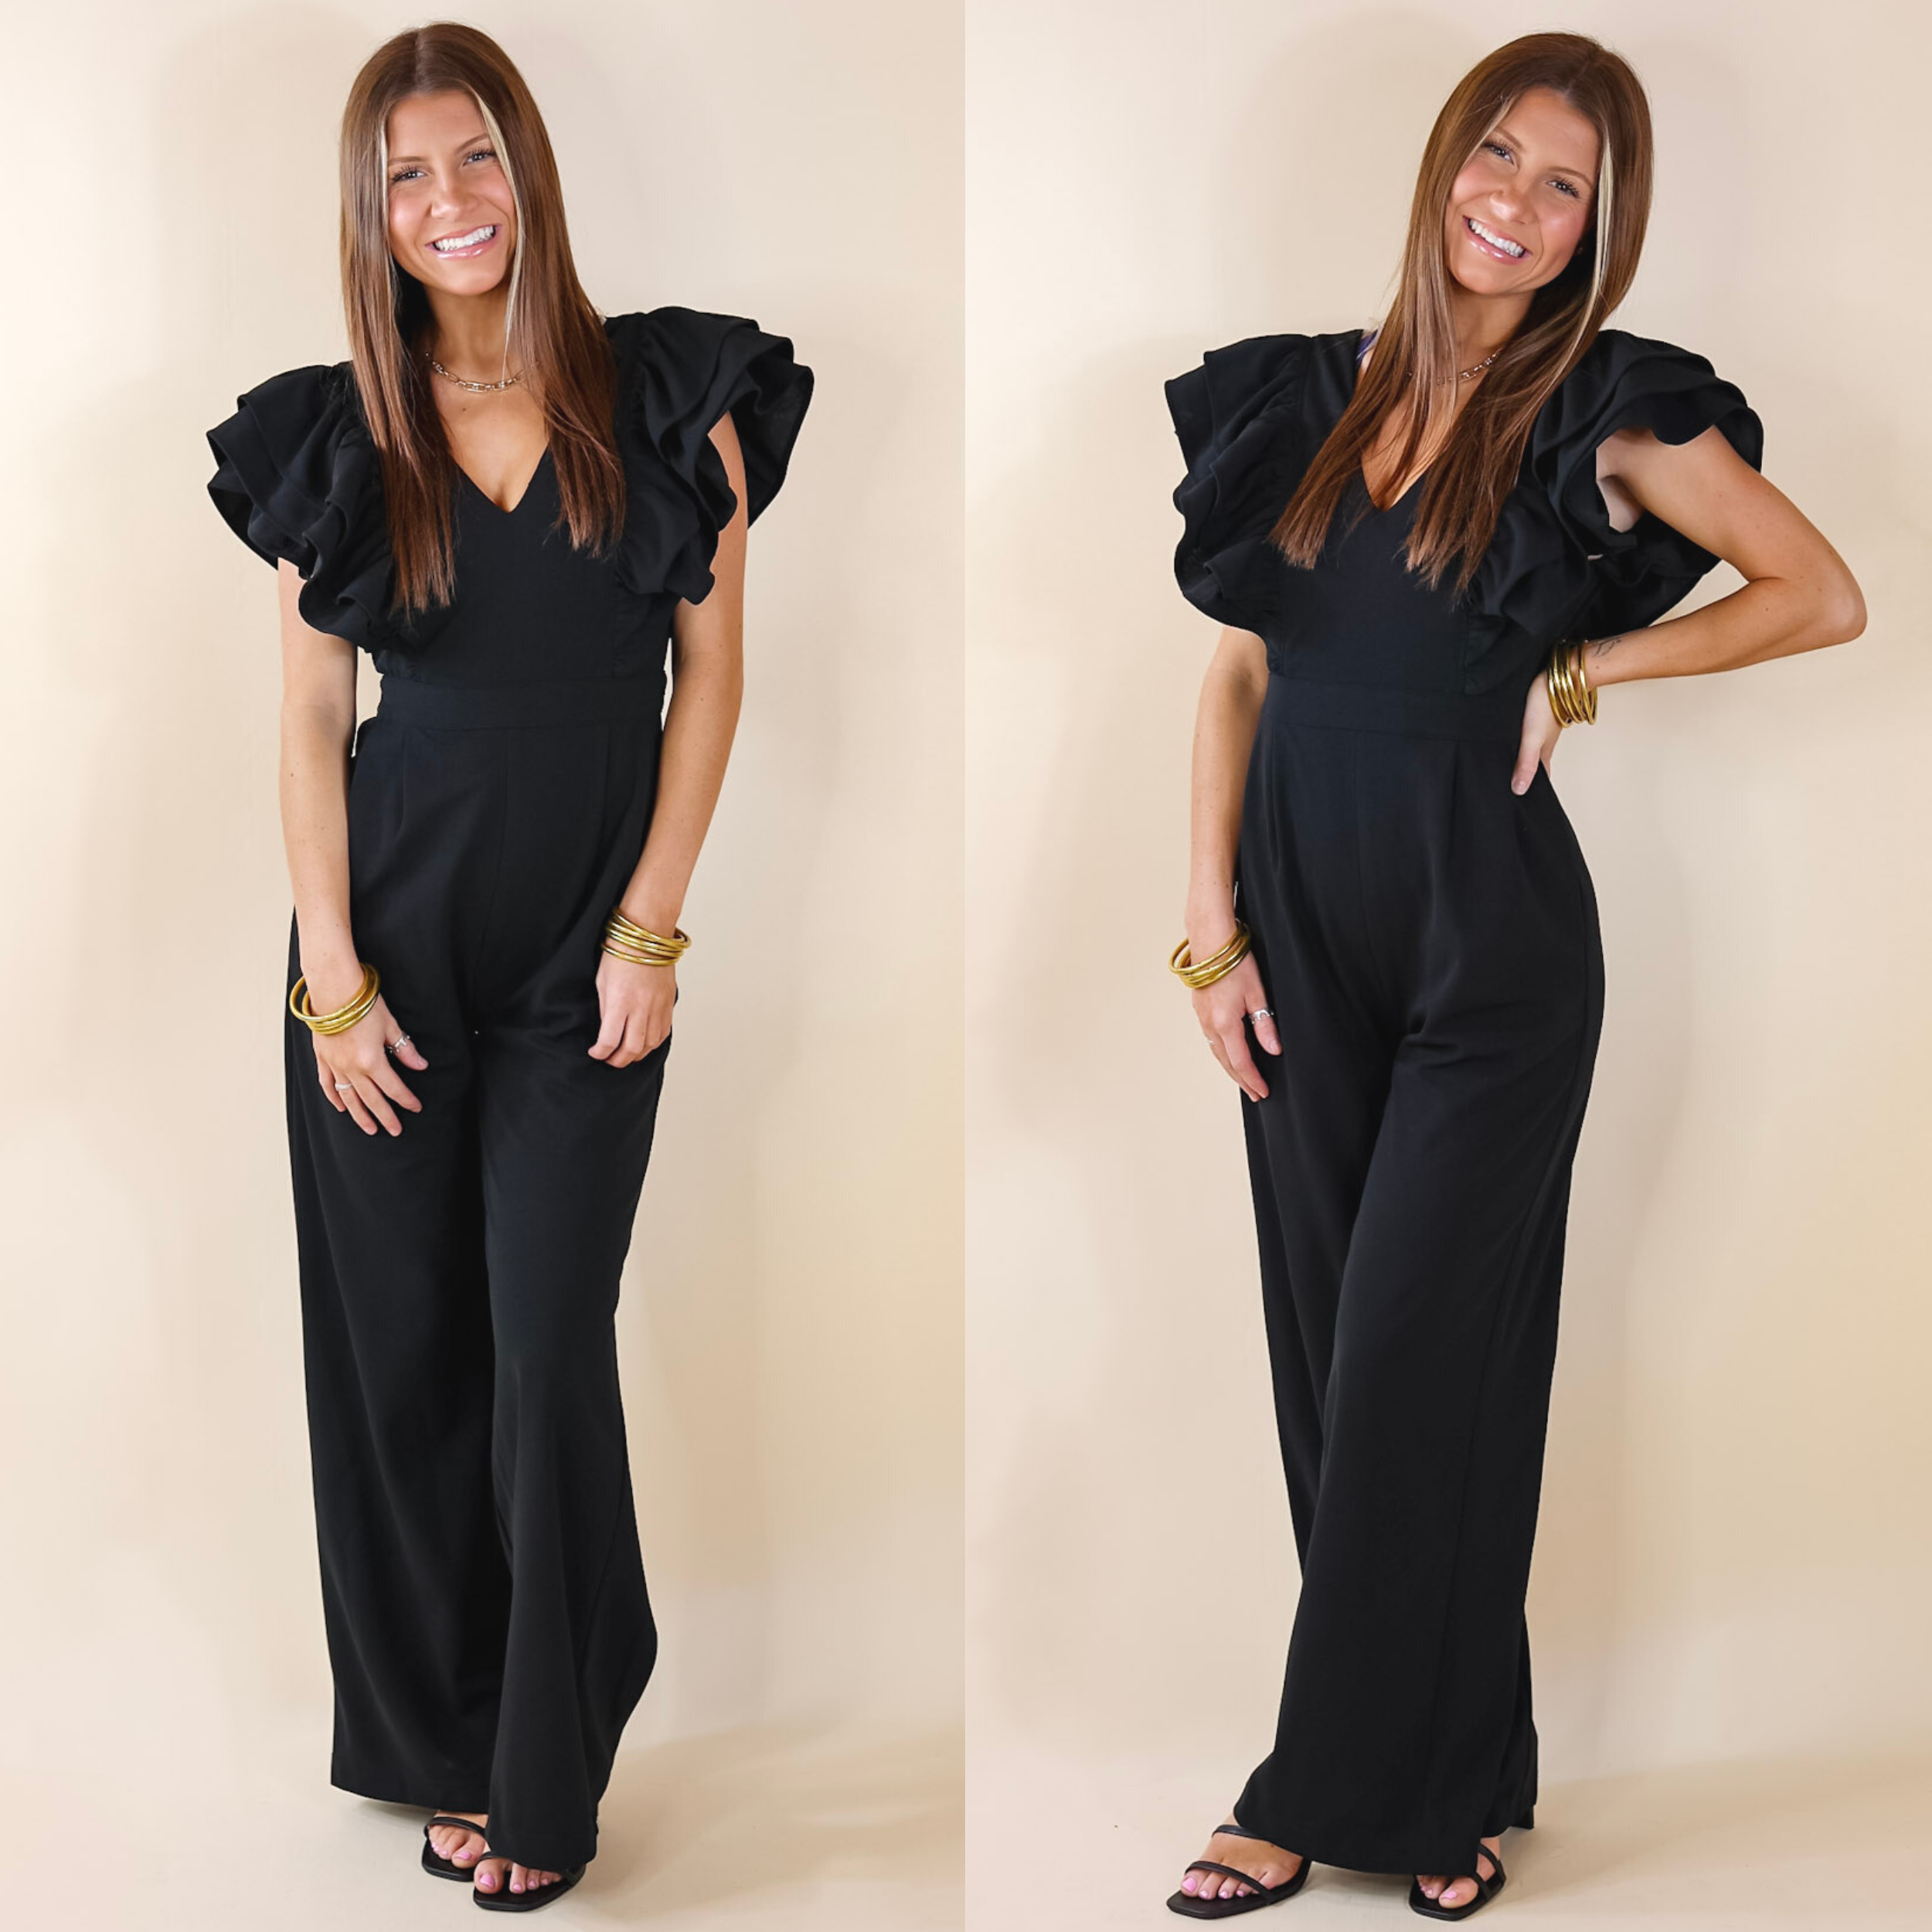 Model is wearing a black jumpsuit with ruffle sleeves and a v neckline. Model has it paired with black heels and gold jewelry.